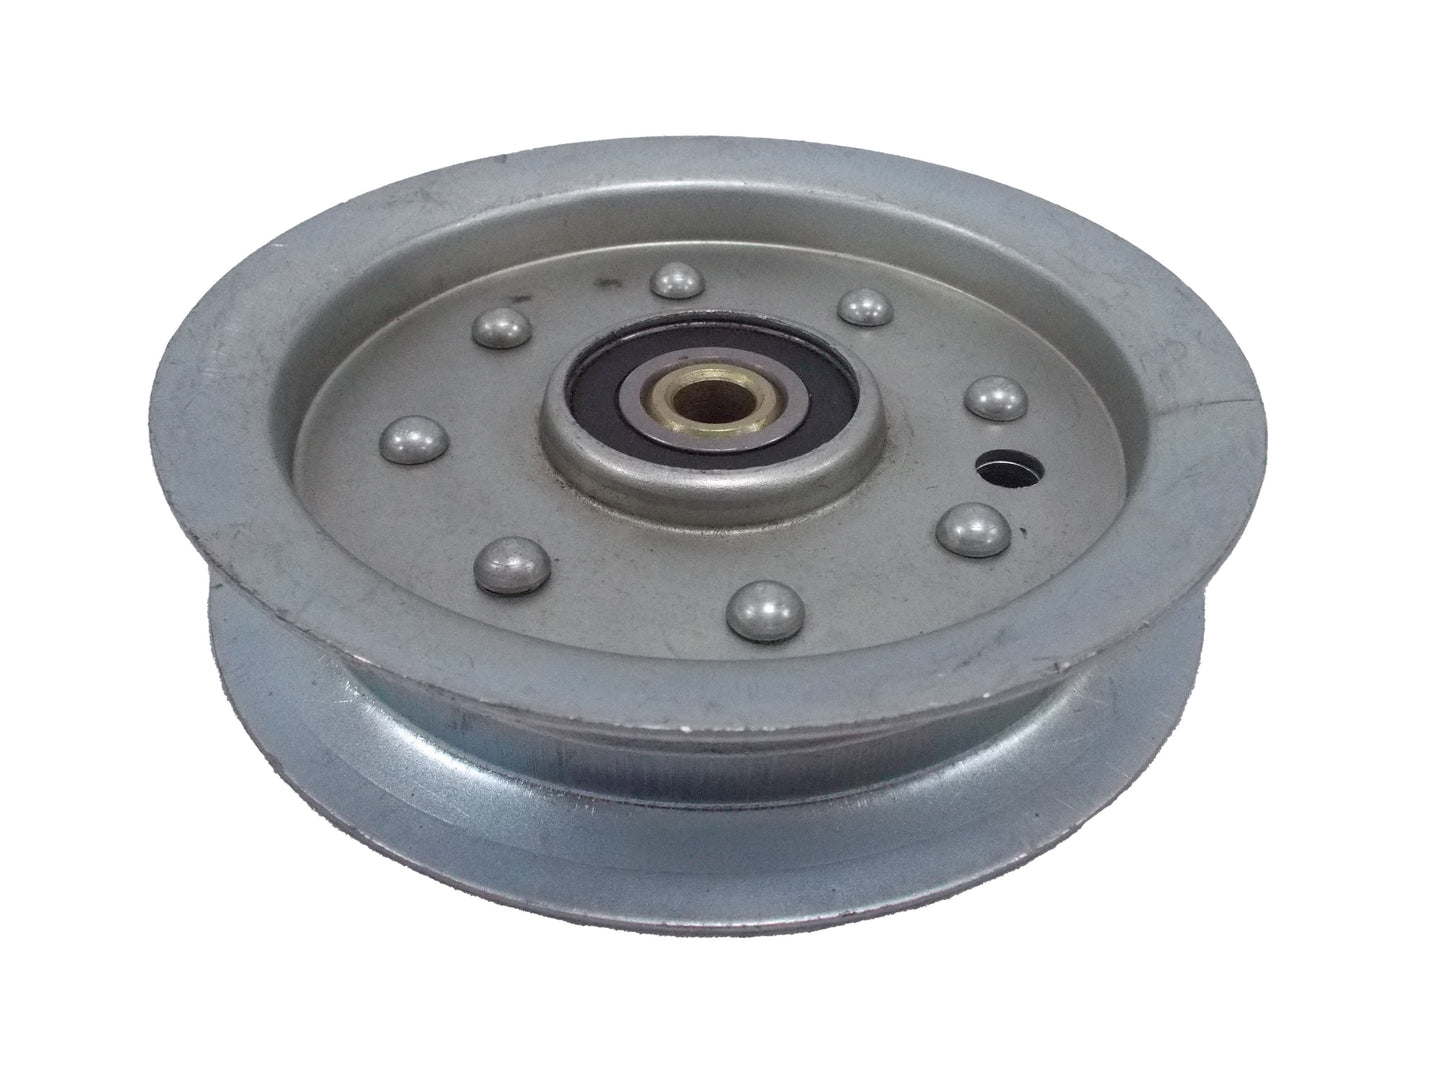 Proven Part Flat Idler Pulley For Snapper 7023966Yp 756-1229